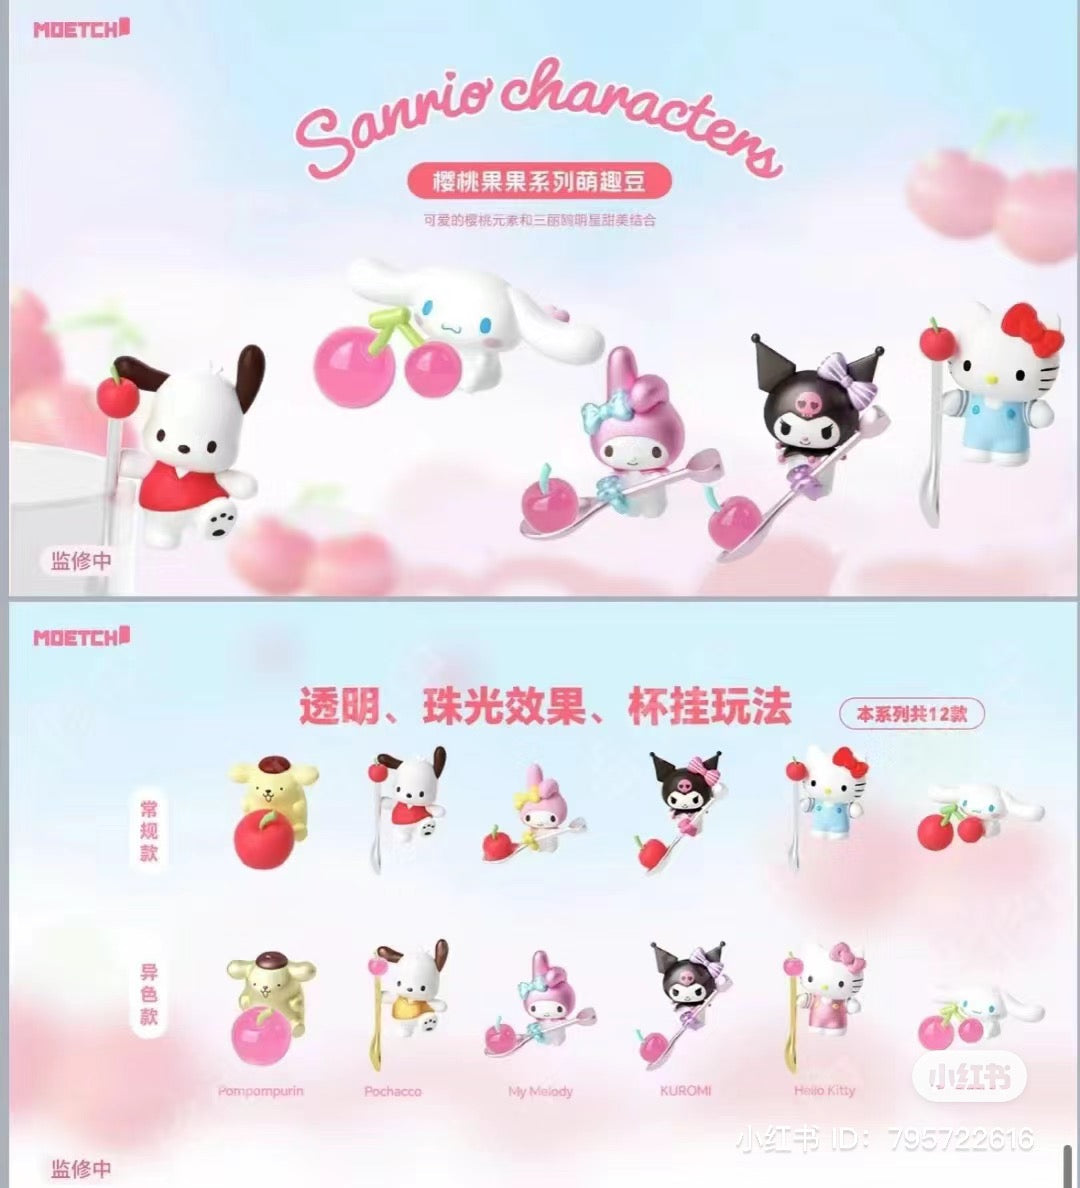 Sanrio characters Cherry Series Moetch Bean Blind Bag featuring various cartoon characters holding objects like apples and spoons.